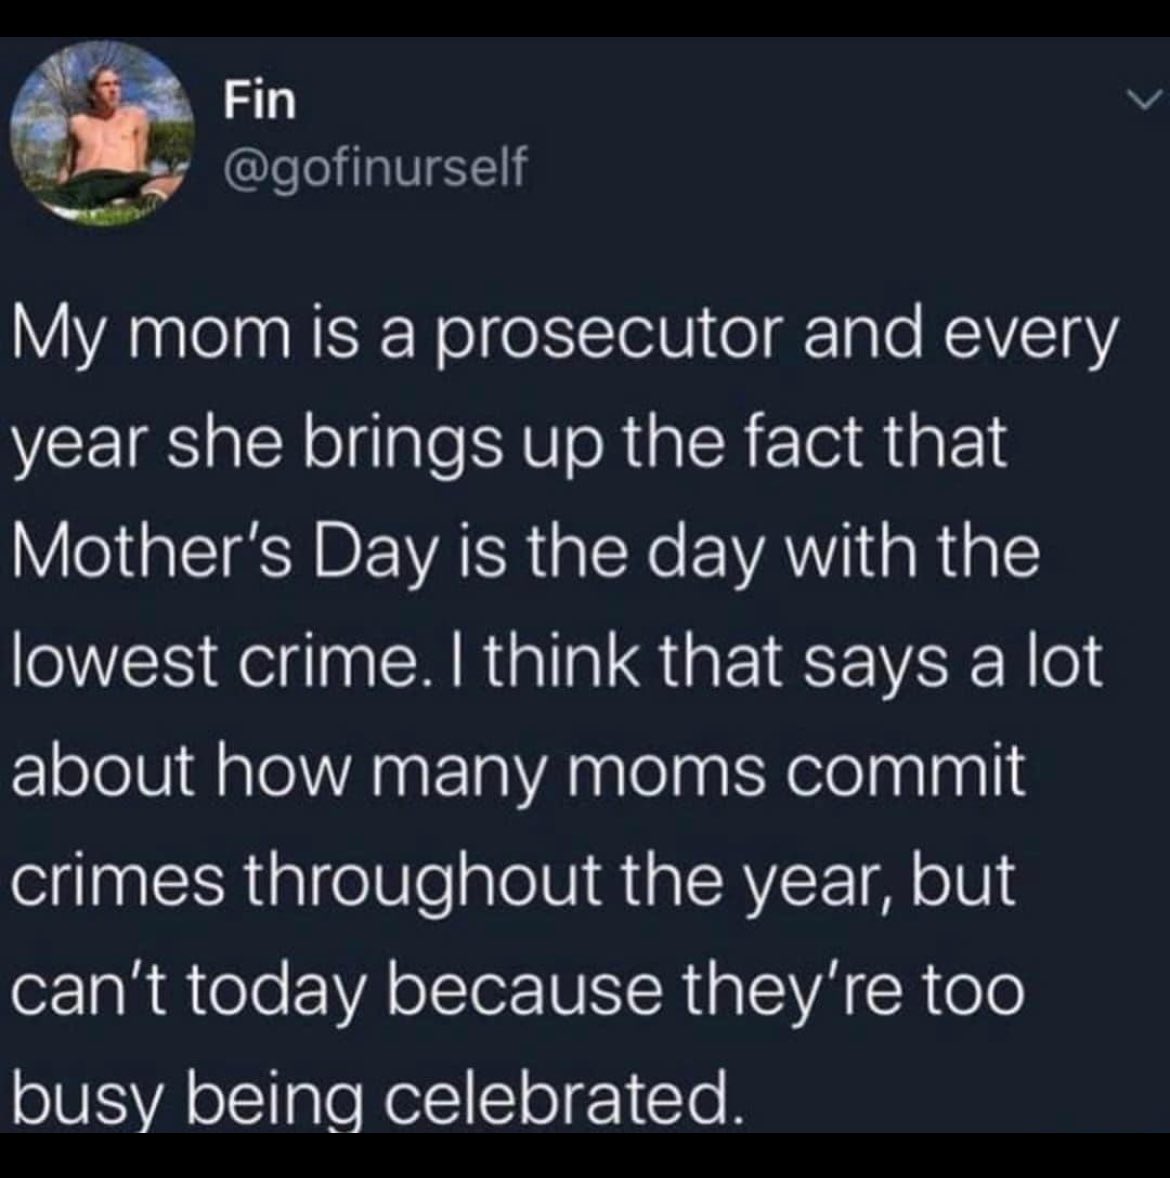 A little Mother’s Day humor to start our day